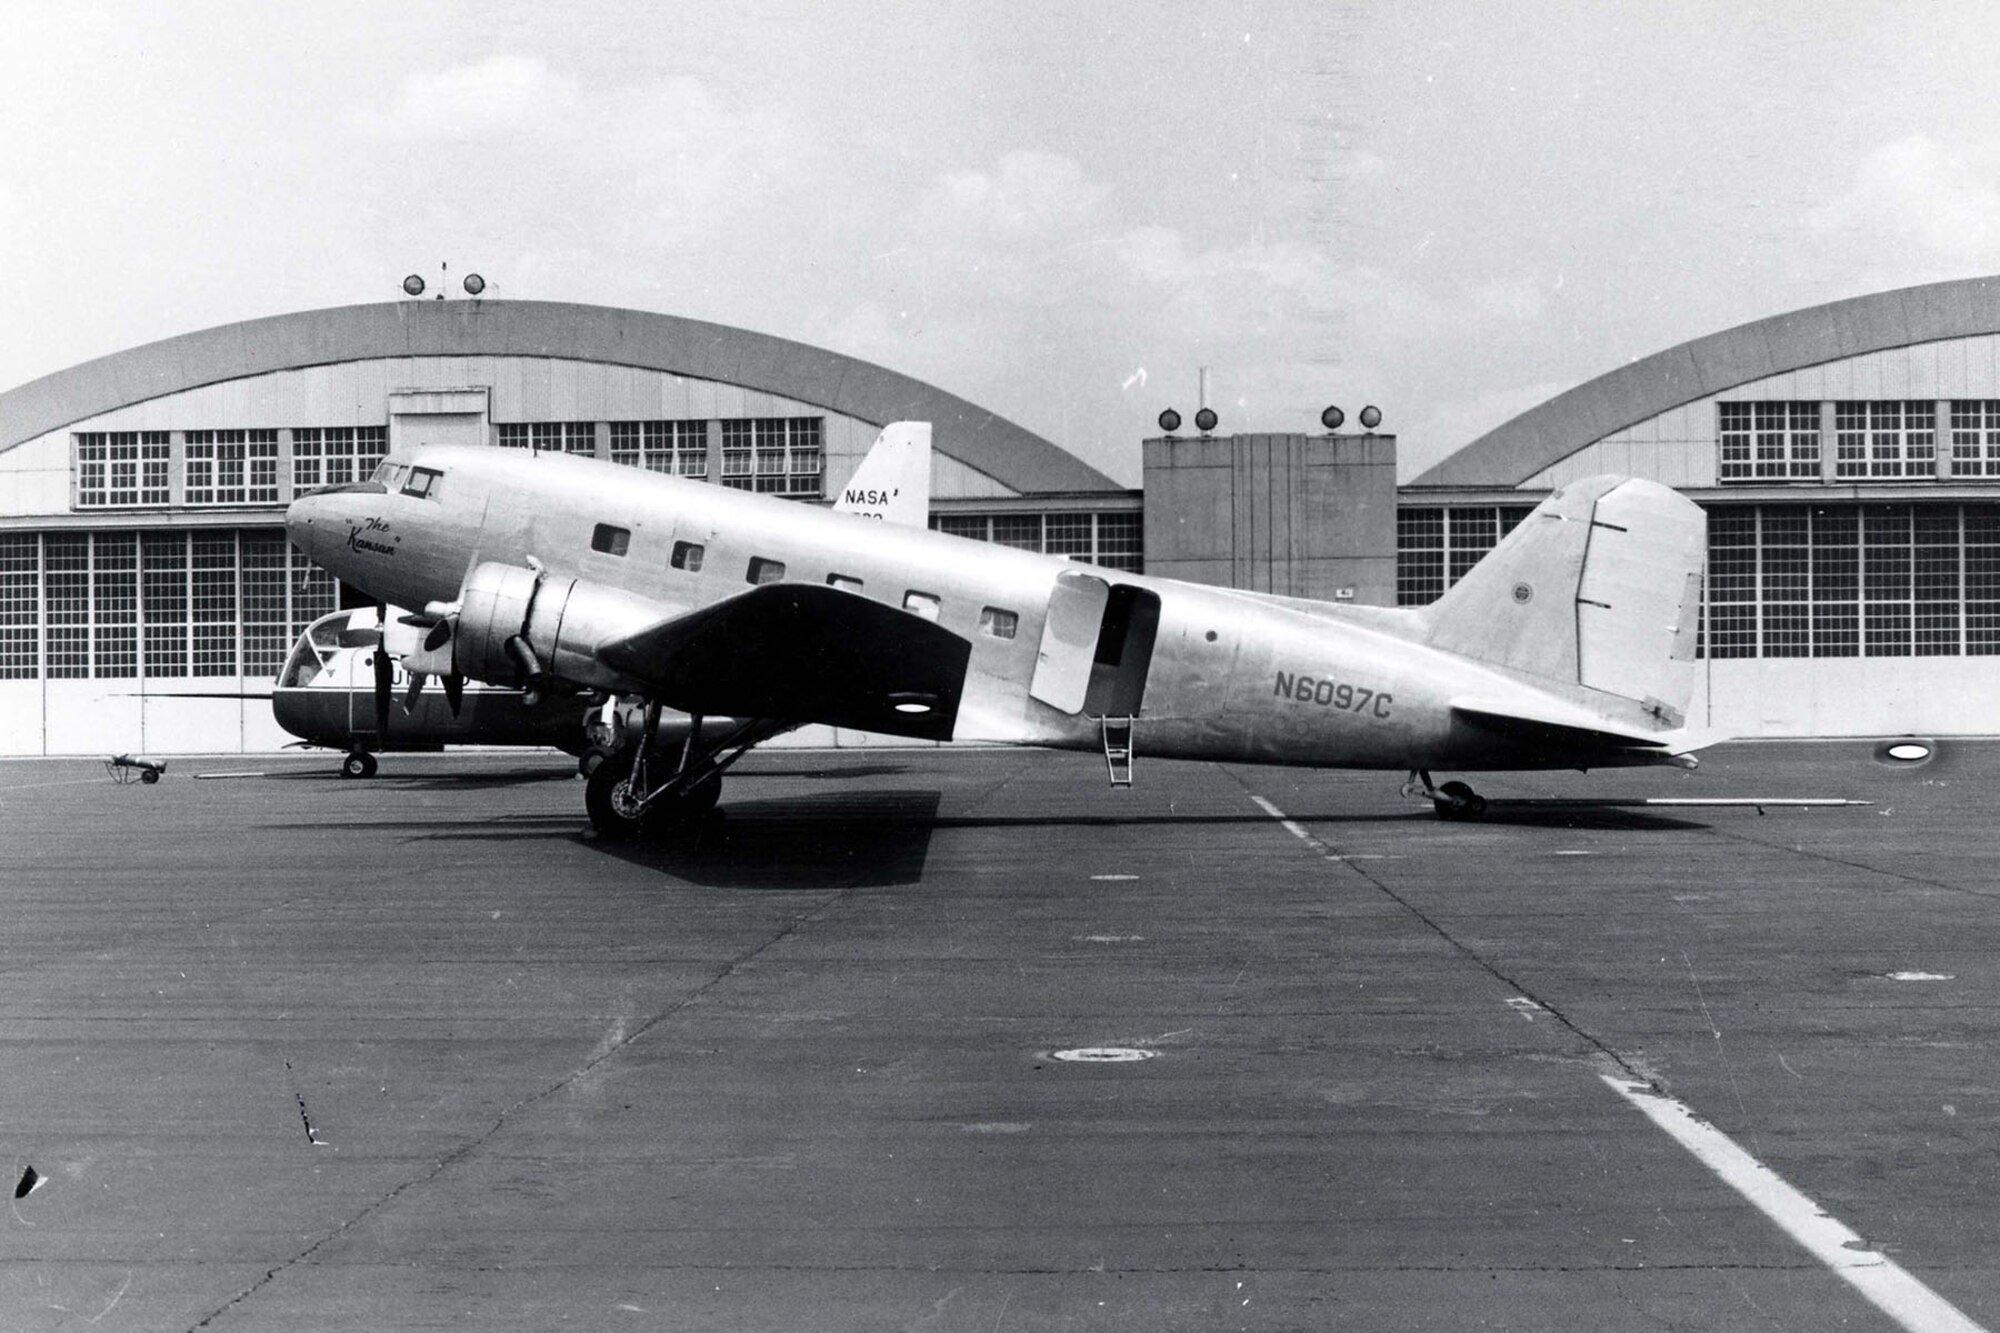 DAYTON, Ohio -- The Douglas C-39 is currently in storage at the National Museum of the United States Air Force. This photo shows N6097C "The Kansan" when it was received by the museum. (U.S Air Force photo)